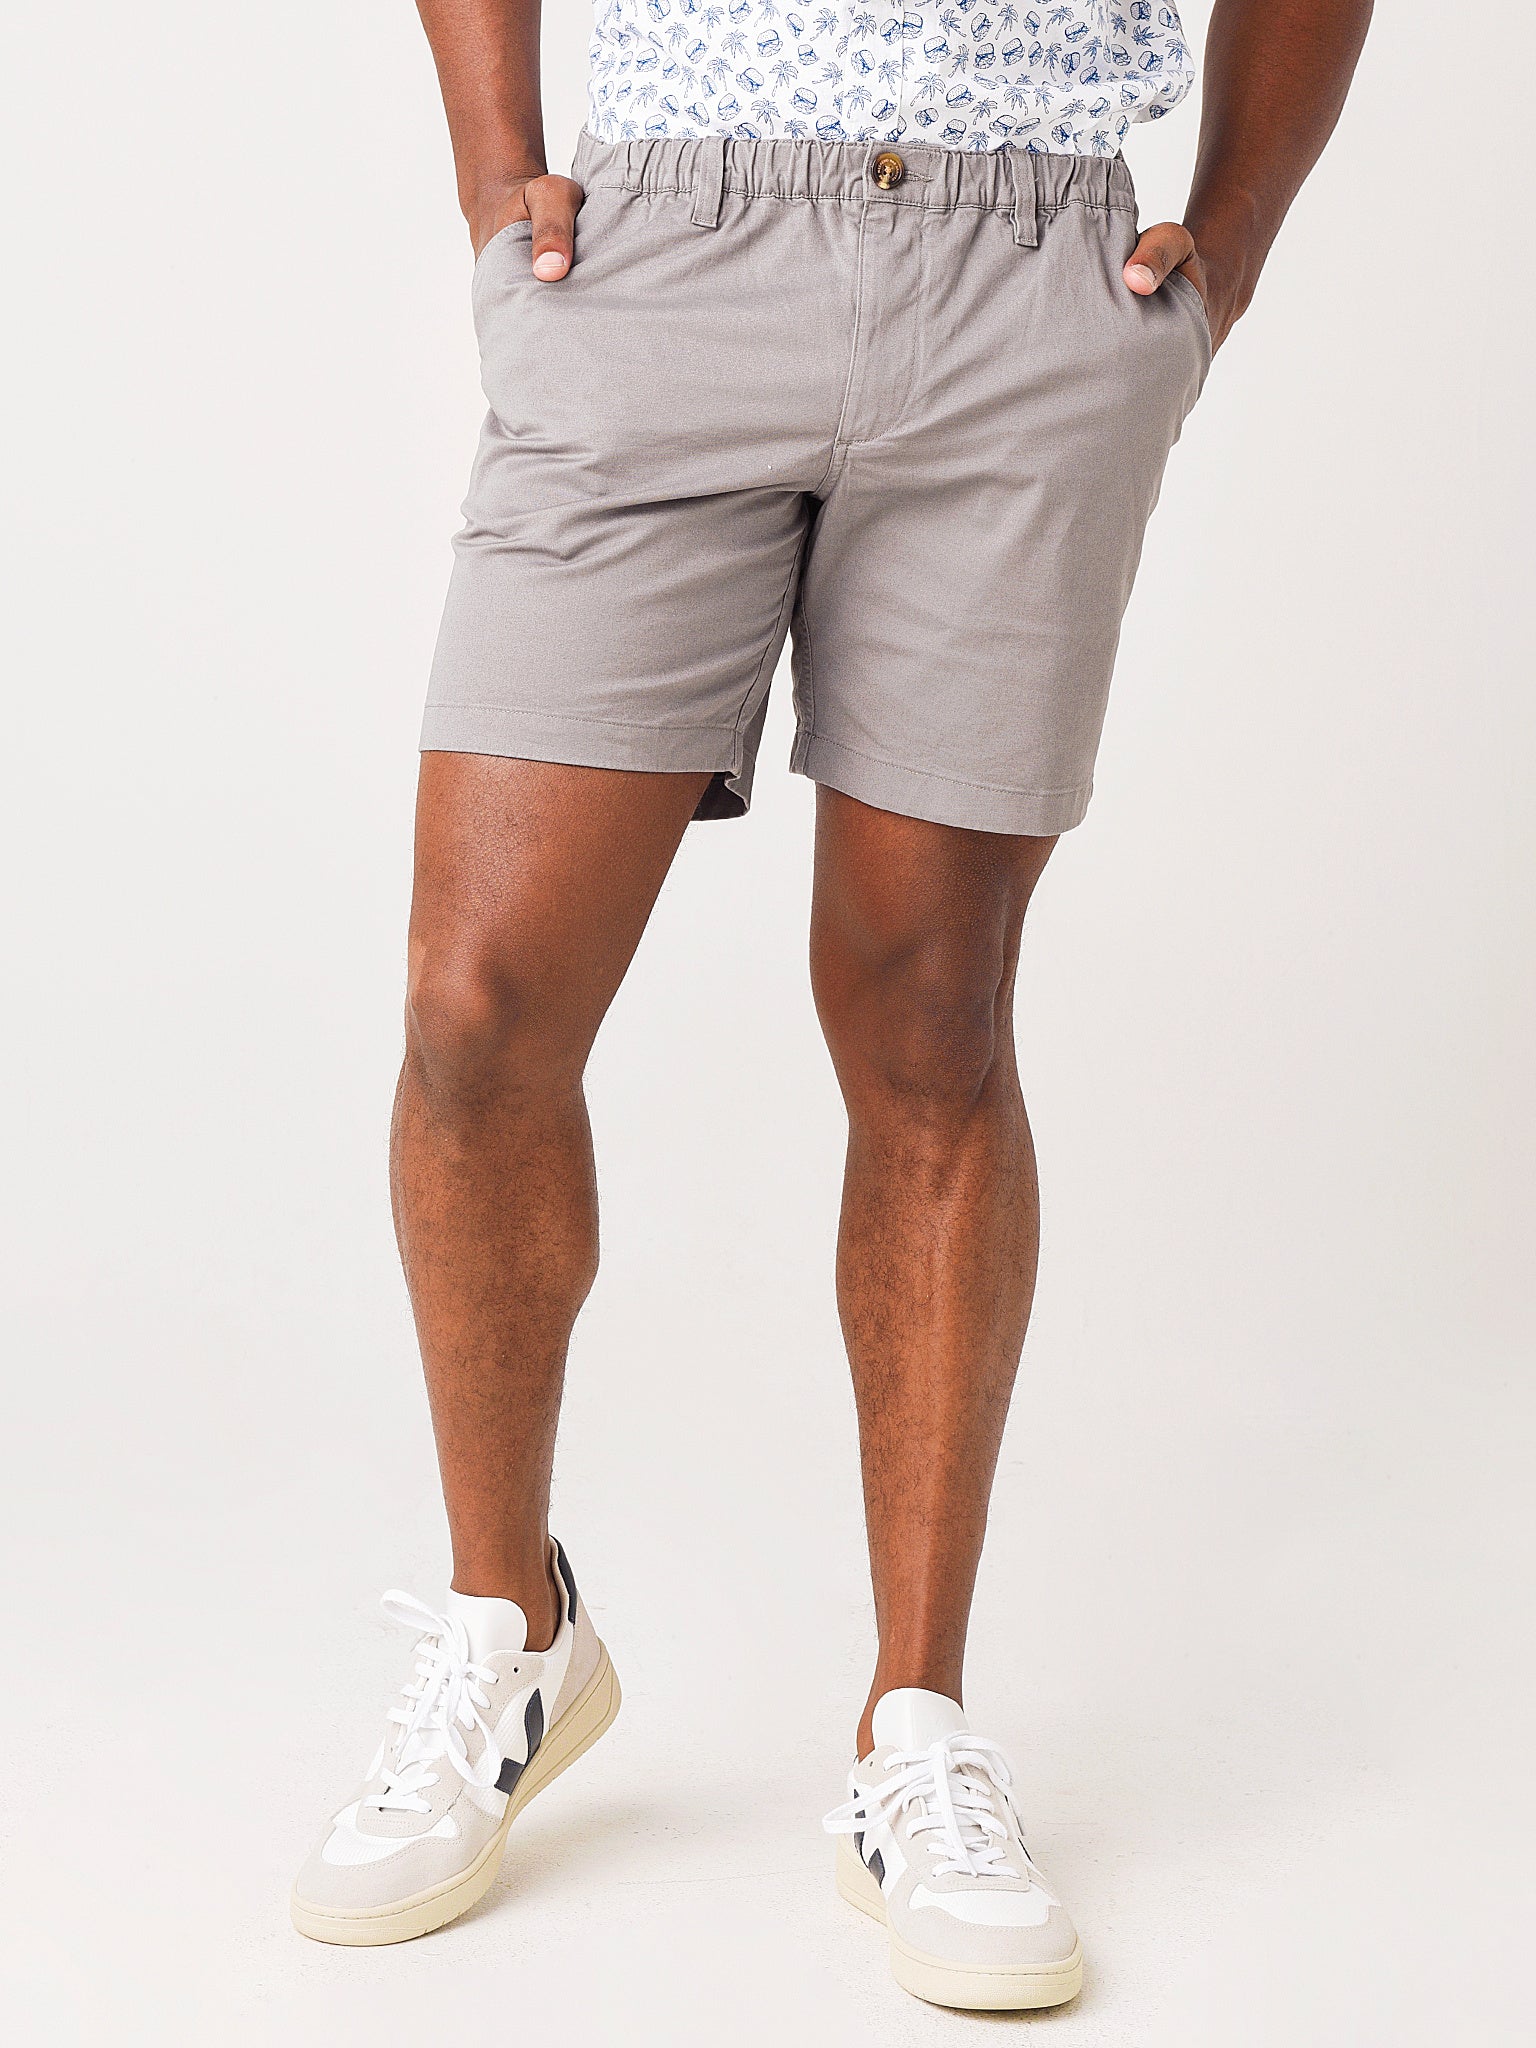 Chubbies Men's The Silver Linings 7  Short